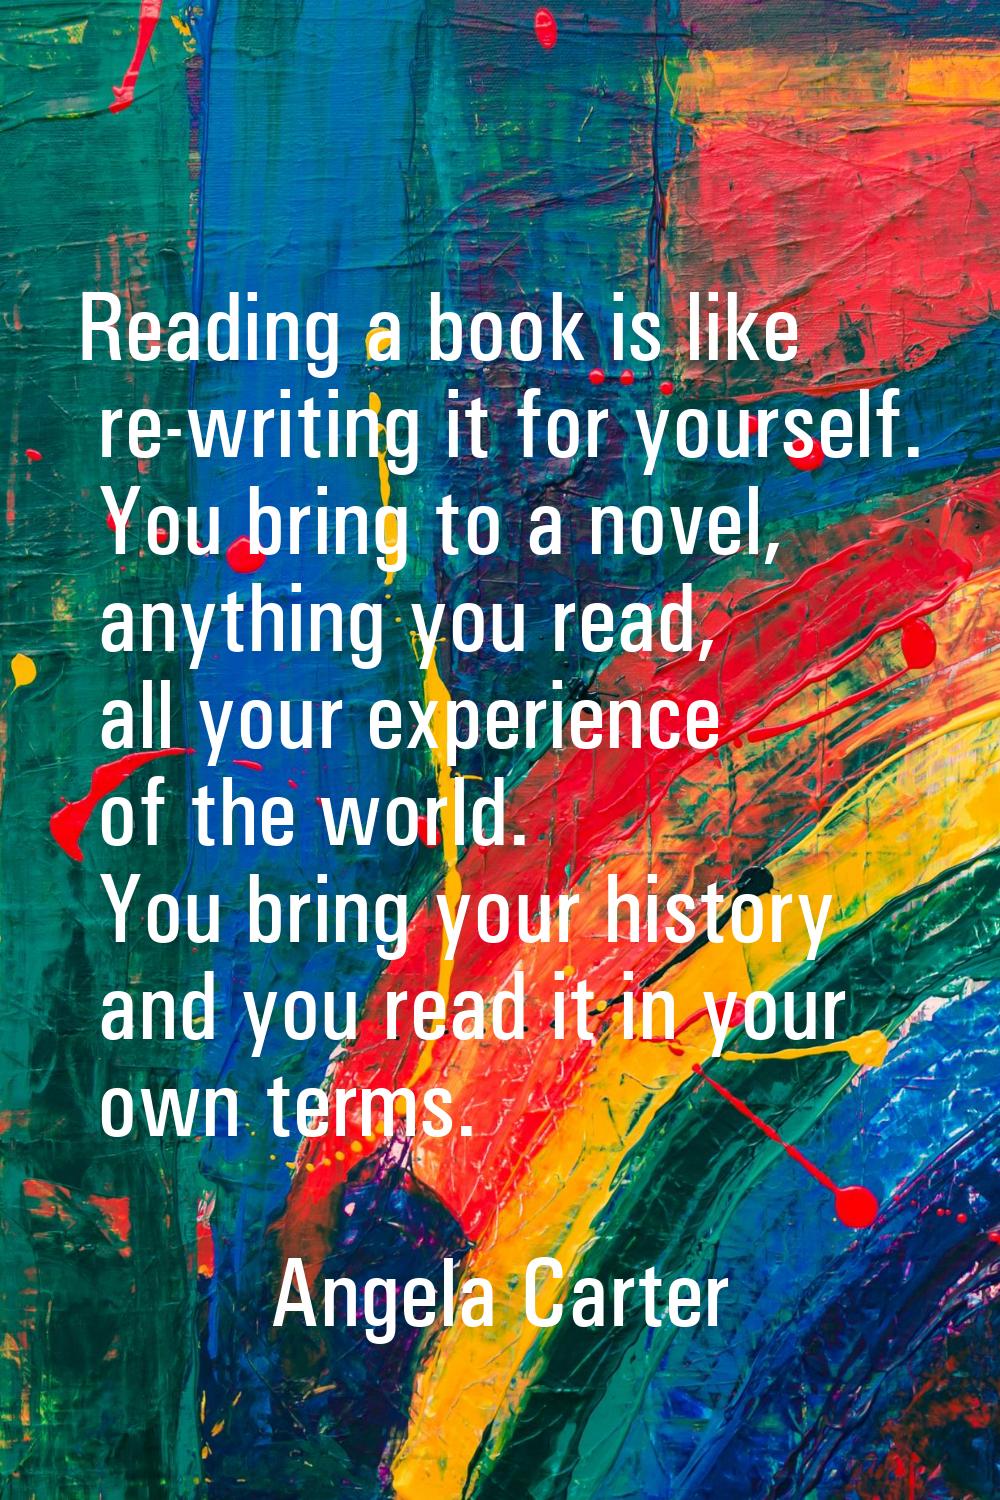 Reading a book is like re-writing it for yourself. You bring to a novel, anything you read, all you